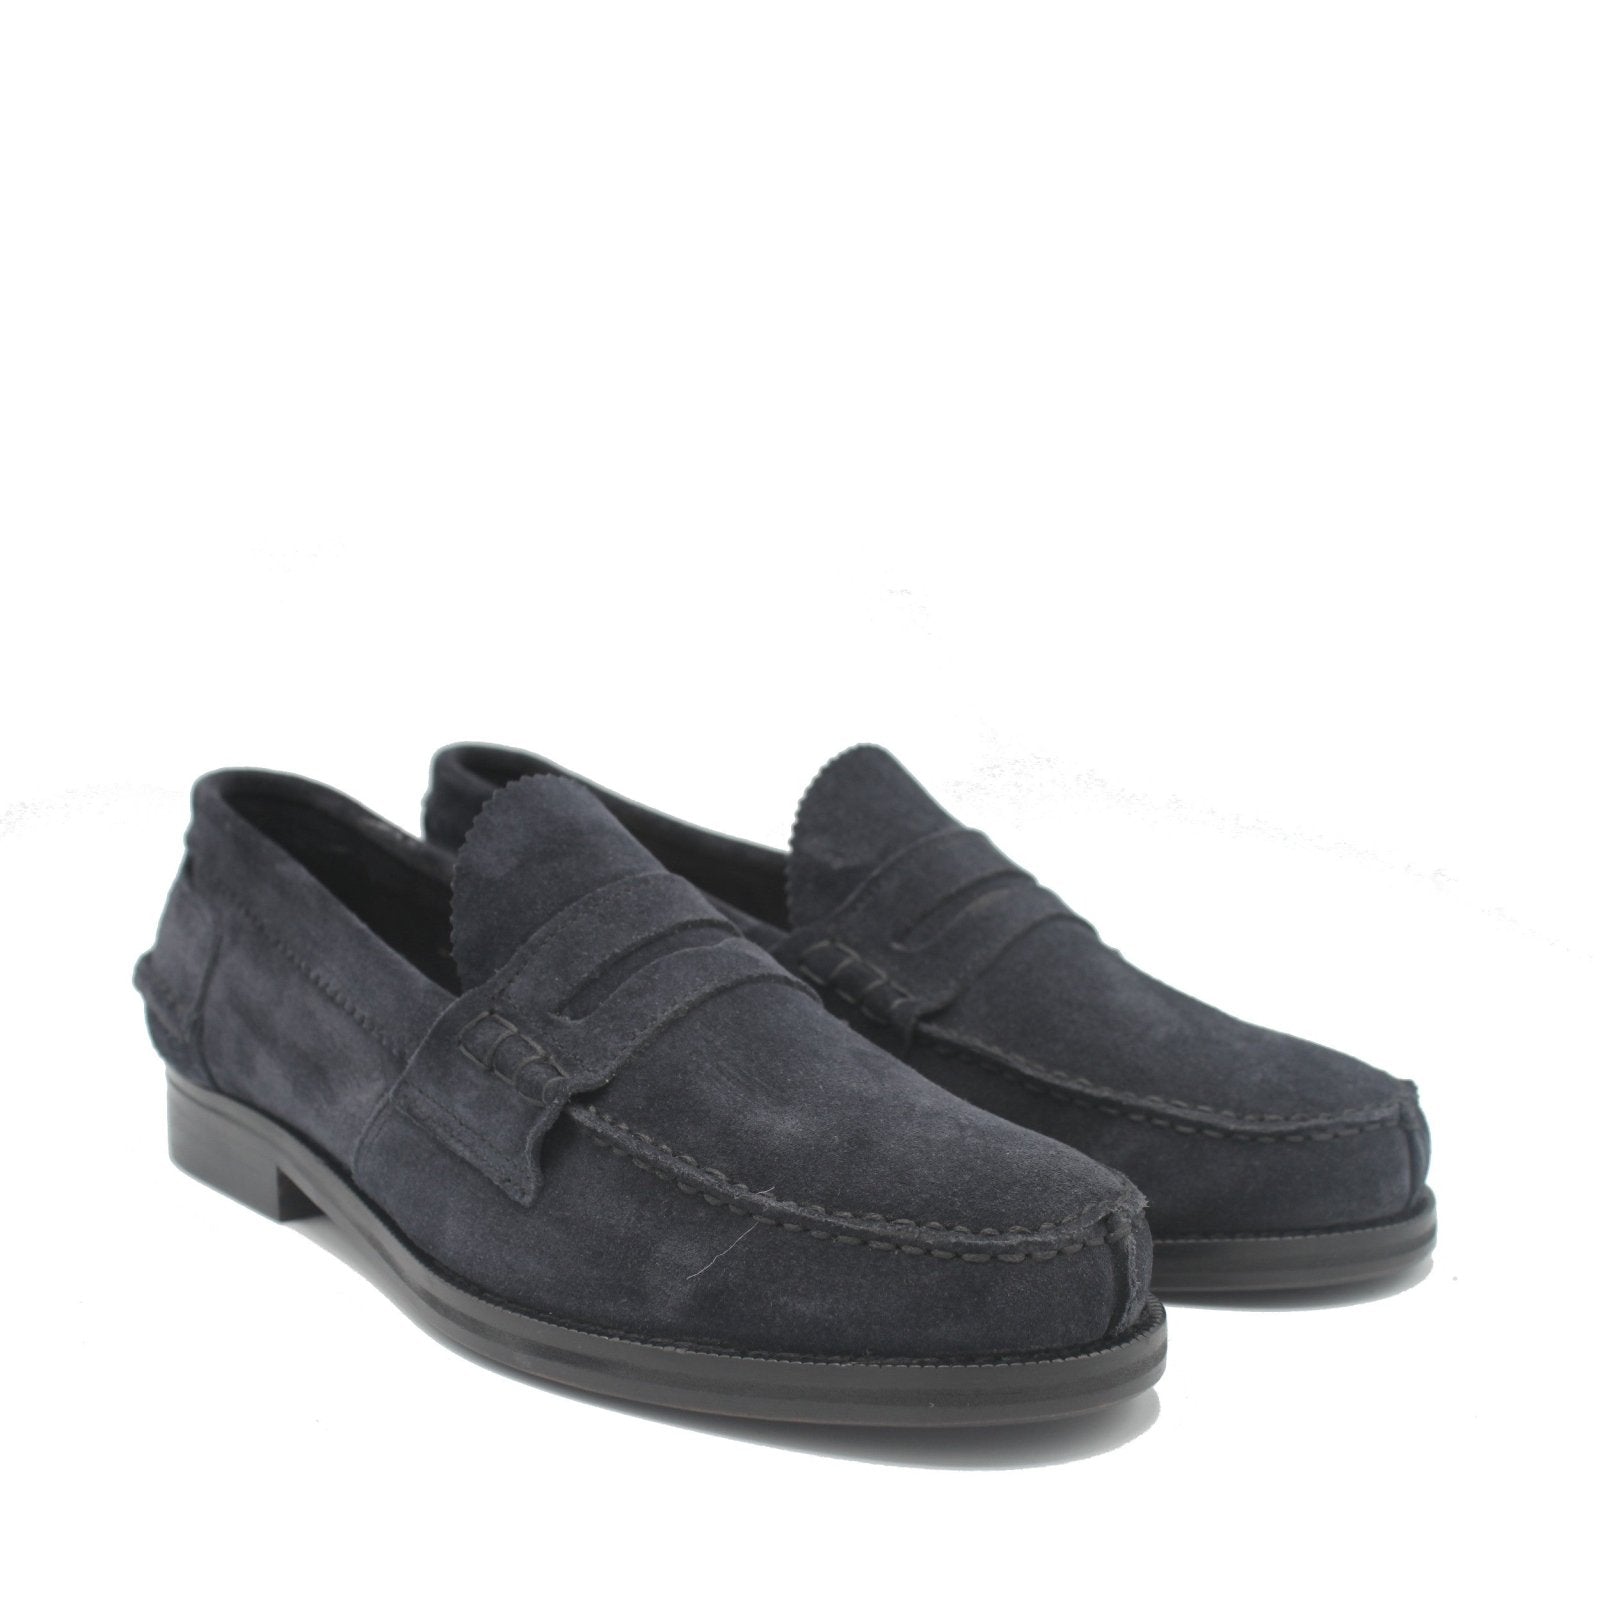 PENNY LOAFER NAVY SUEDE - Saxone of Scotland